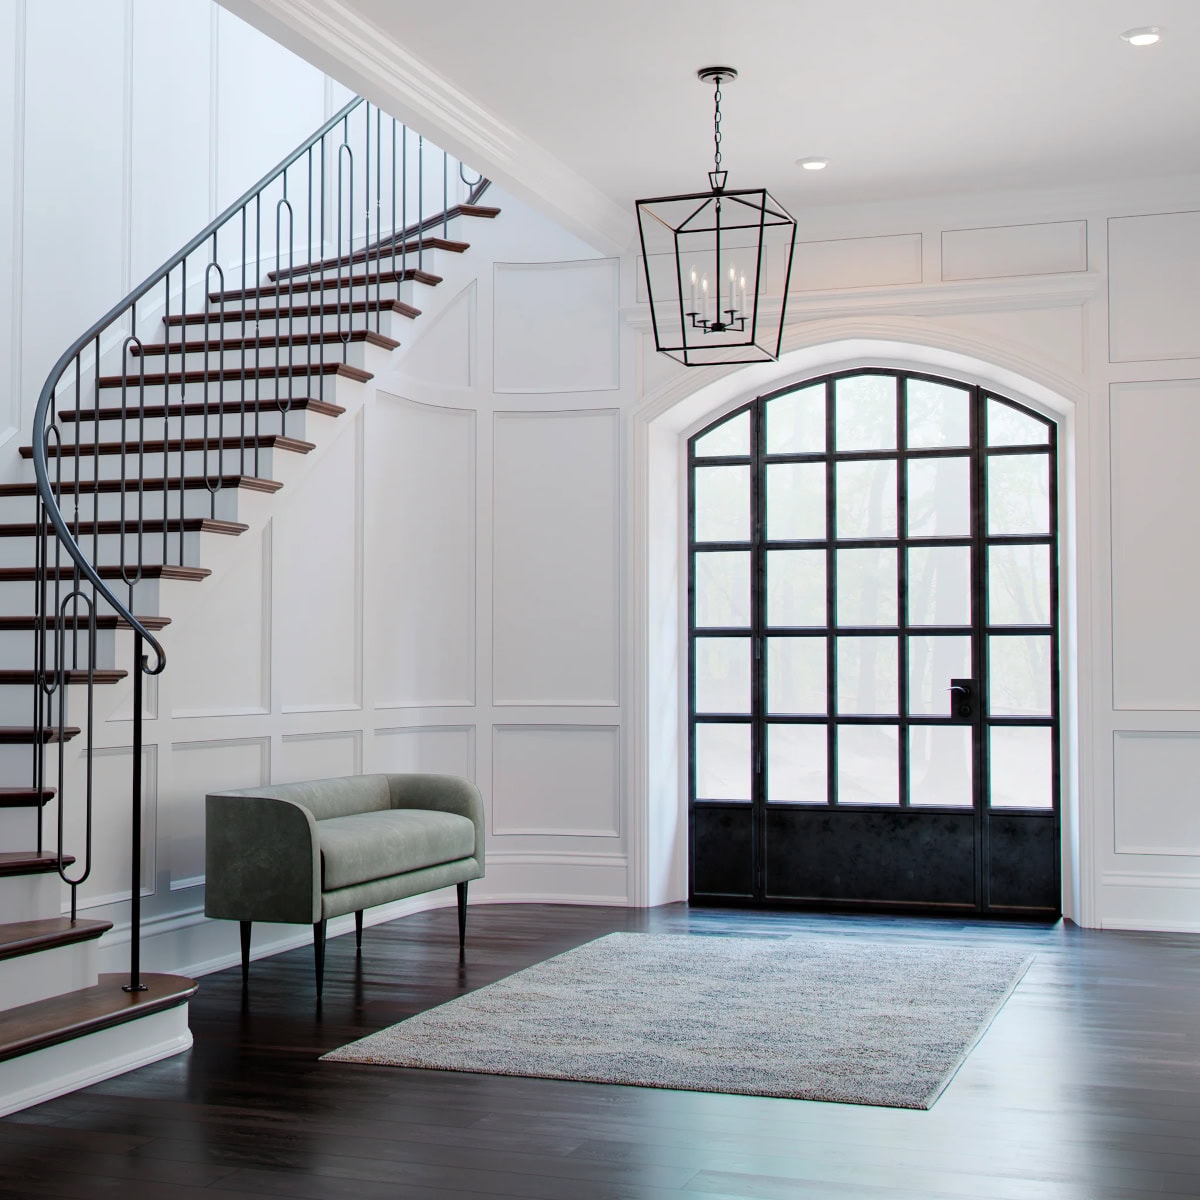 Dianna Black Chandelier in an Entry Way